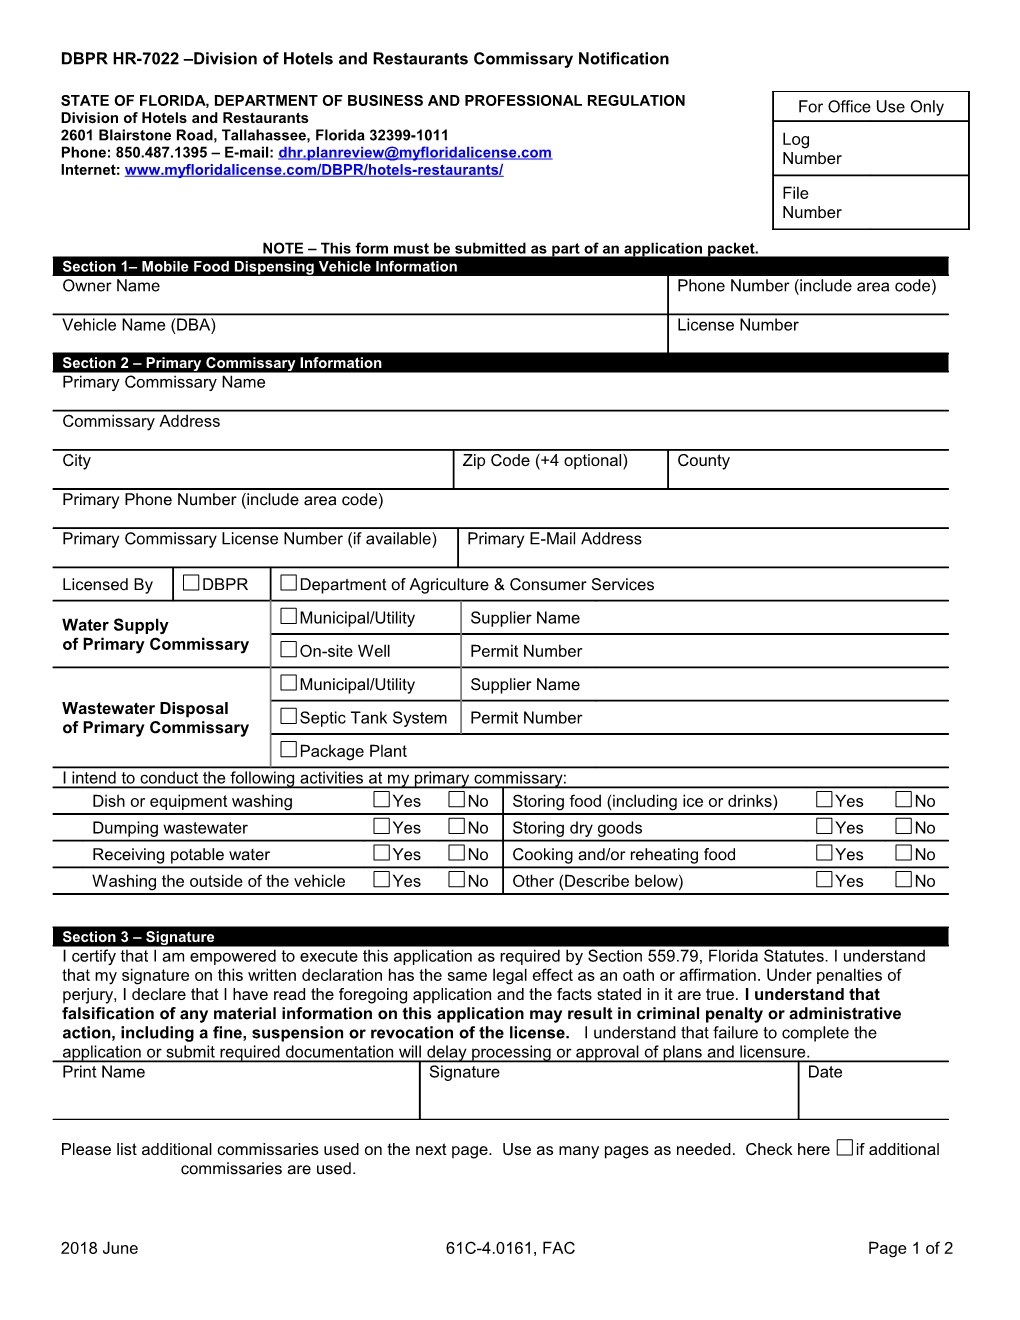 DBPR HR-7022 Division of Hotels and Restaurants Commissary Notification